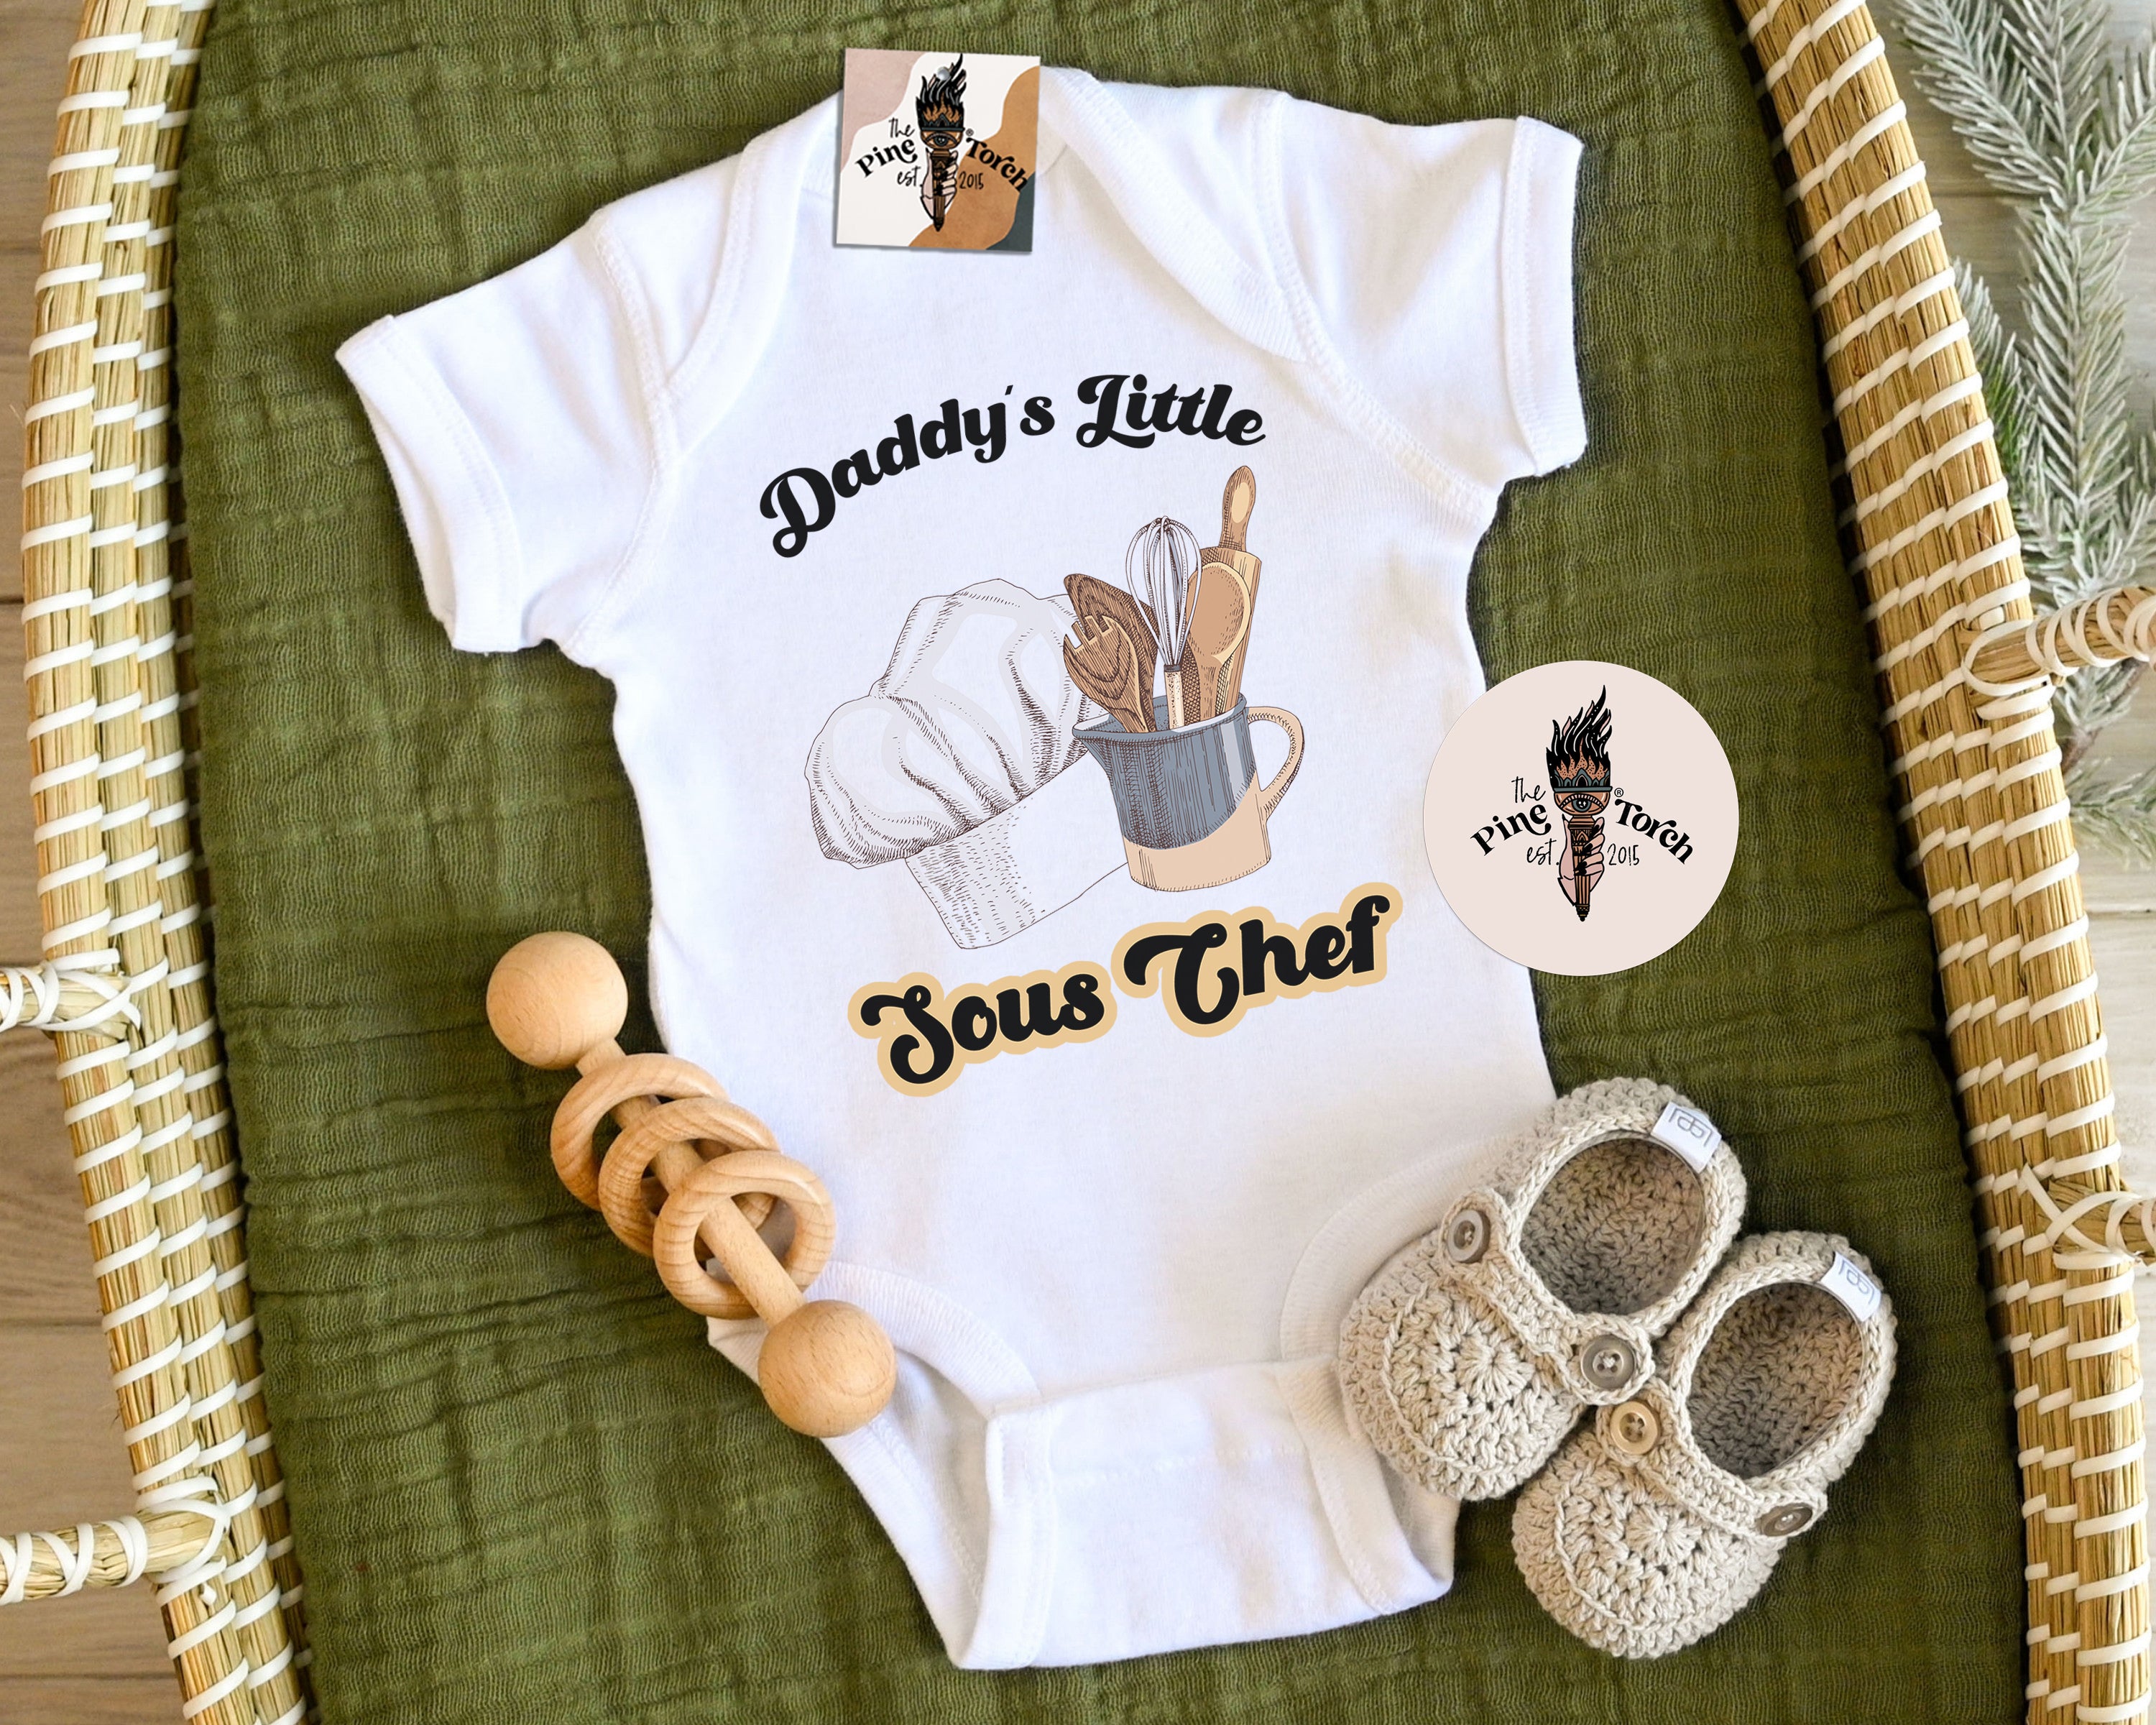 « DADDY'S LITTLE SOUS CHEF » BODYSUIT